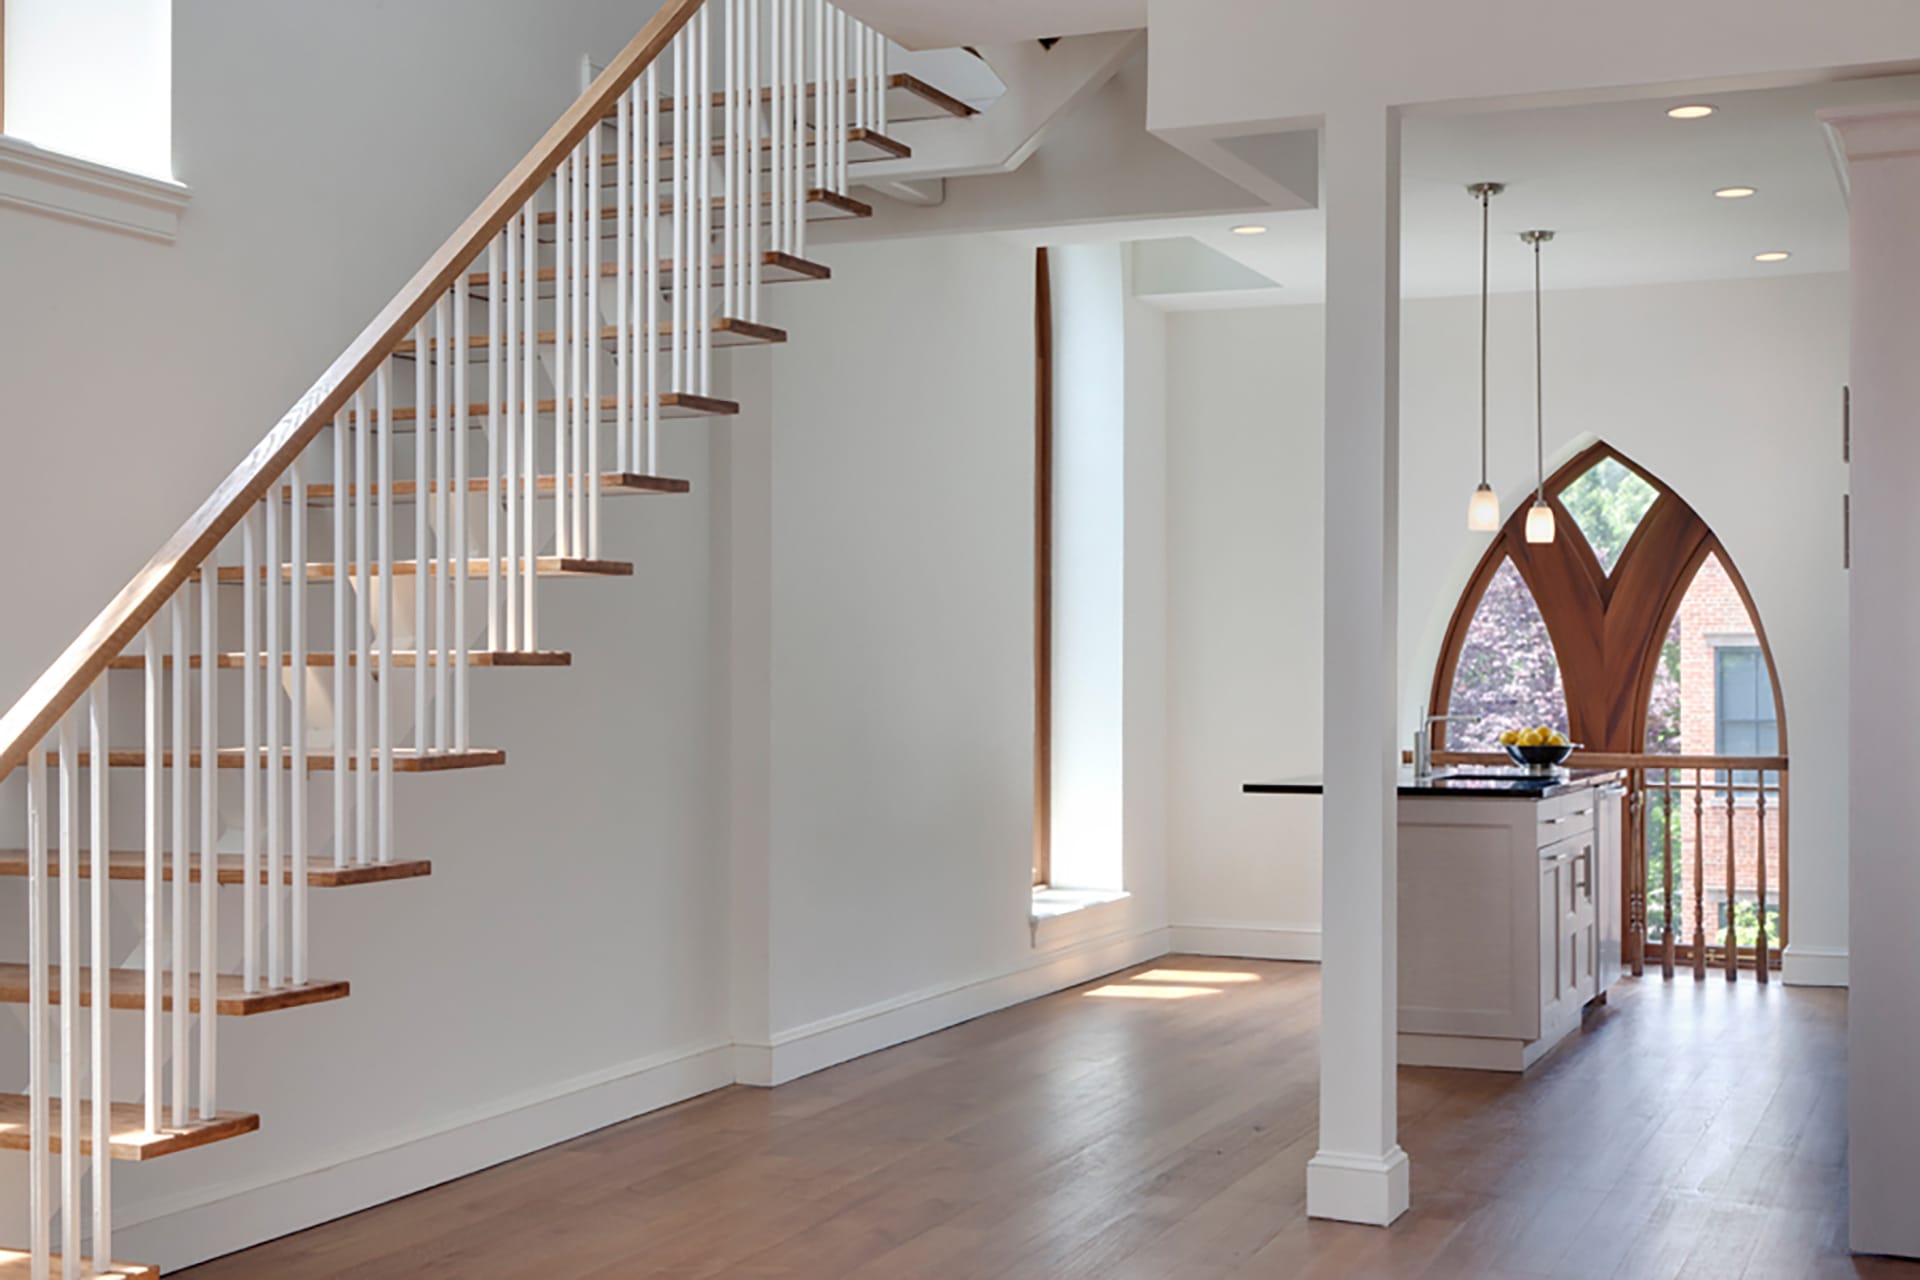 Kirchen with an open stringer, open riser staircase, restored windows, and white island in a Brooklyn condo